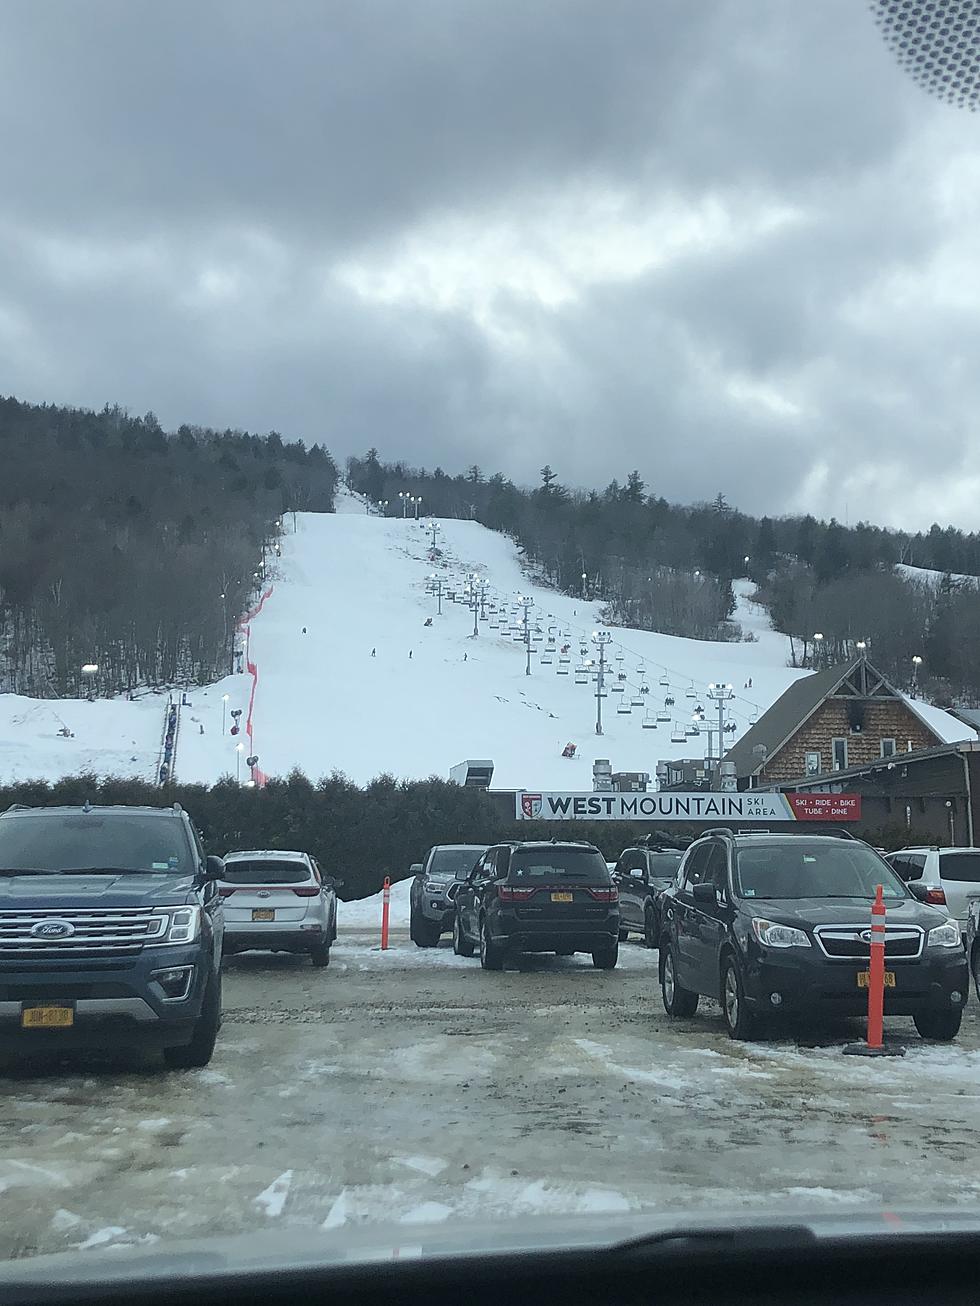 Popular North Country NY Ski Mountain Expanding to Slopeside Resort